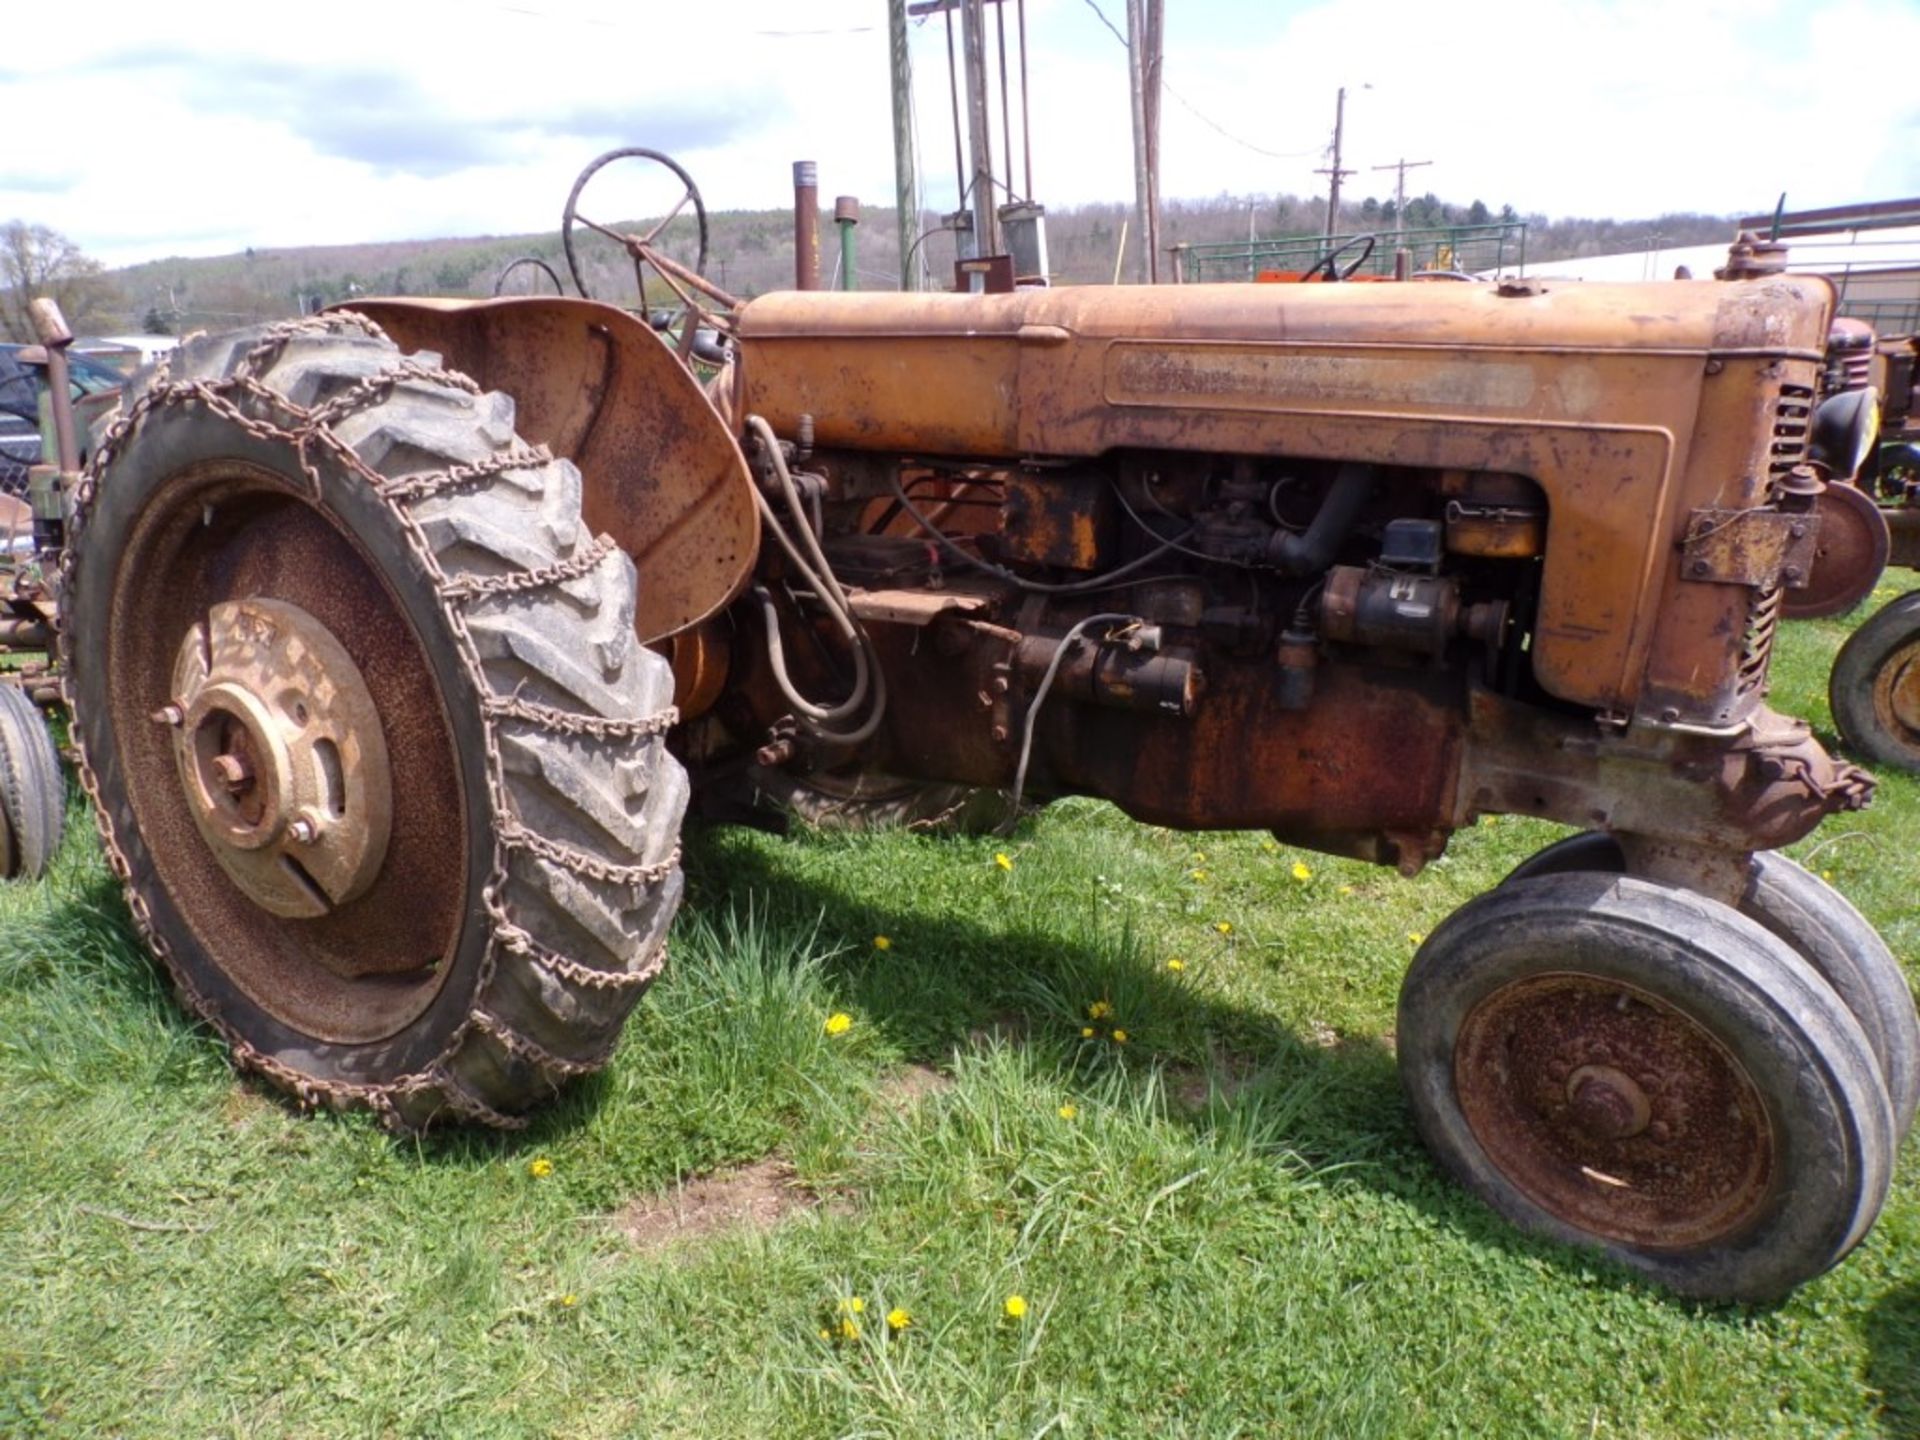 Minn Z Mo Tractor, NFE w/Chains - Not Running, Needs Work (4304) - Image 2 of 2